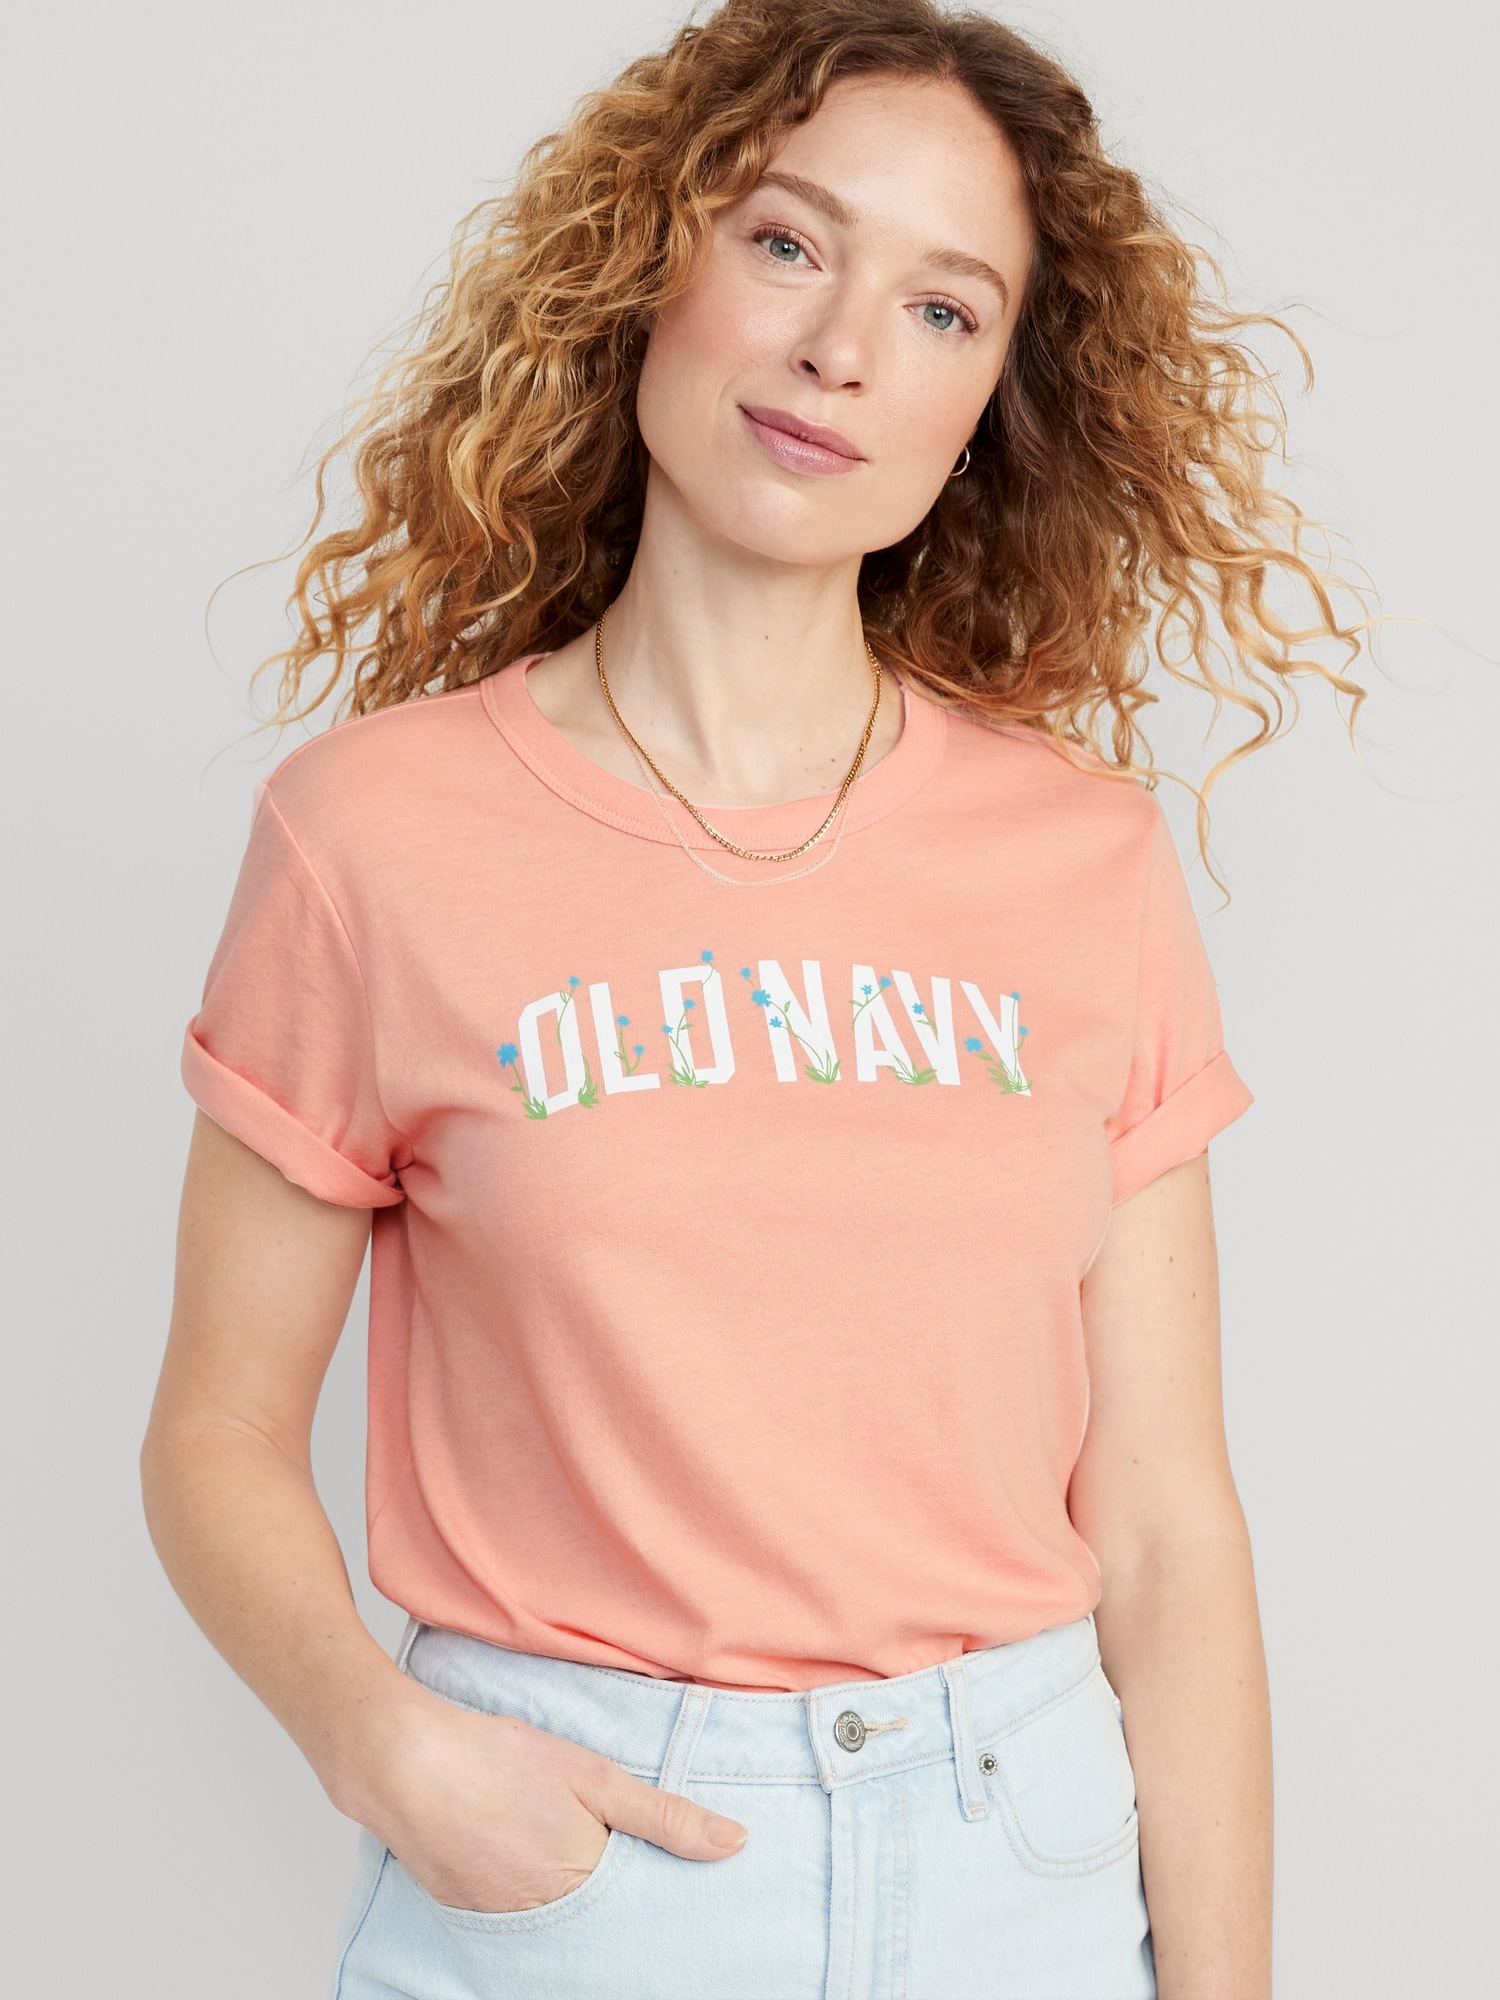 Old Navy EveryWear Logo Graphic T-Shirt for Women pink. 1